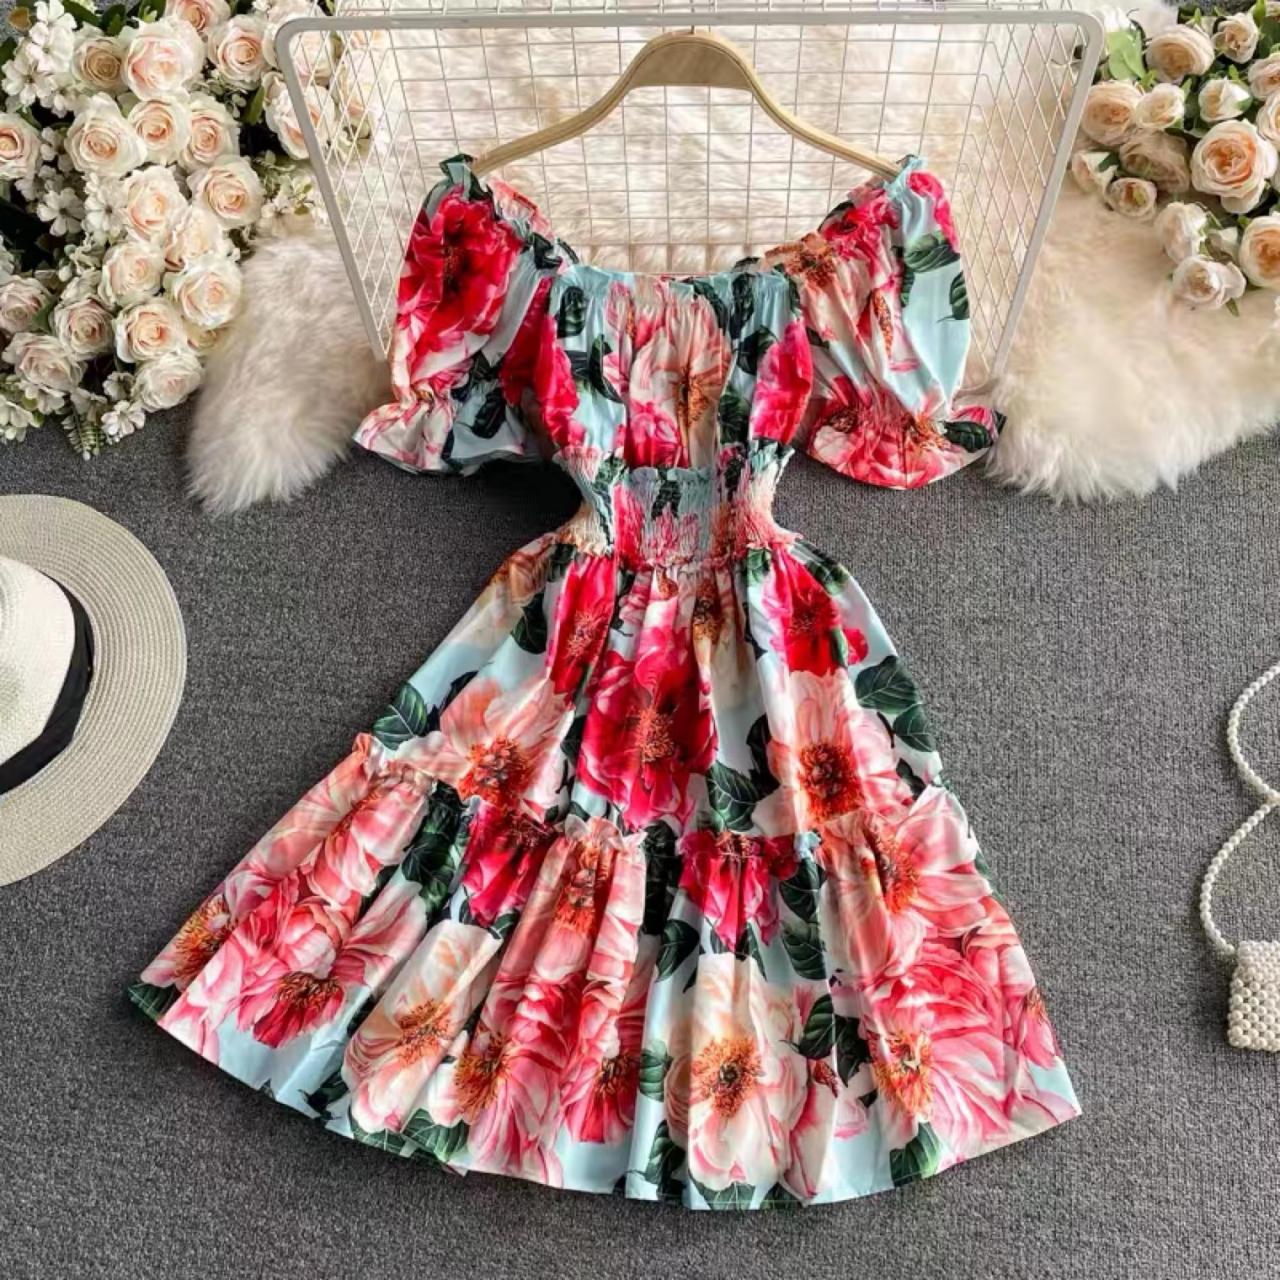 Vintage, Gentle, Holiday Printed Square-neck Dress, Puffed Sleeves High Waisted A-line Midi Dress